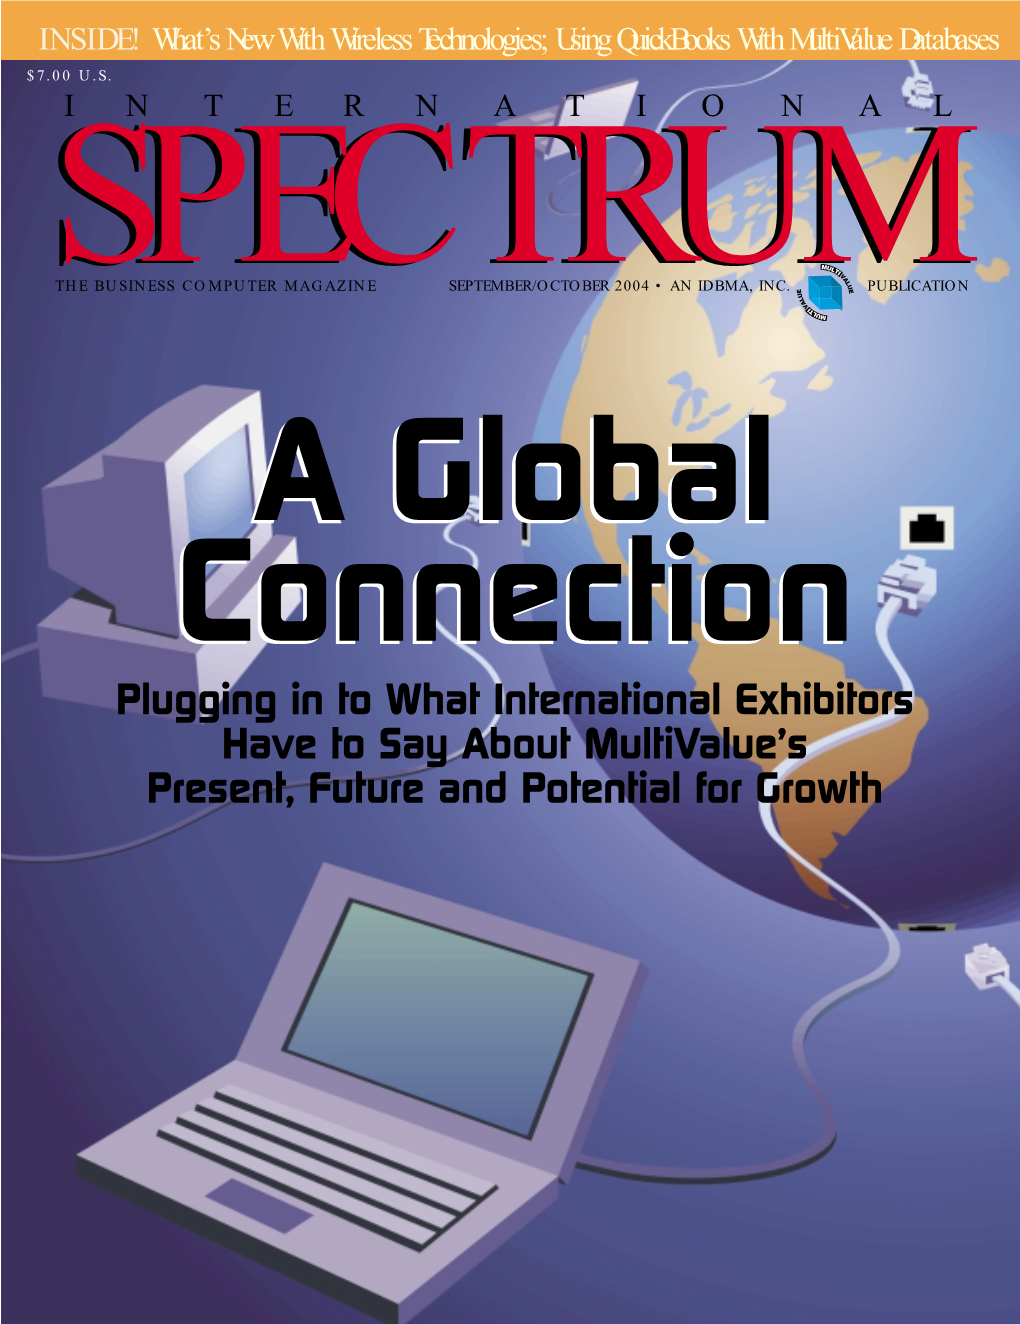 Plugging in to What International Exhibitors Have to Say About Multivalue’S Present, Future and Potential for Growth the BUSINESS COMPUTER MAGAZINE INTERNATIONAL